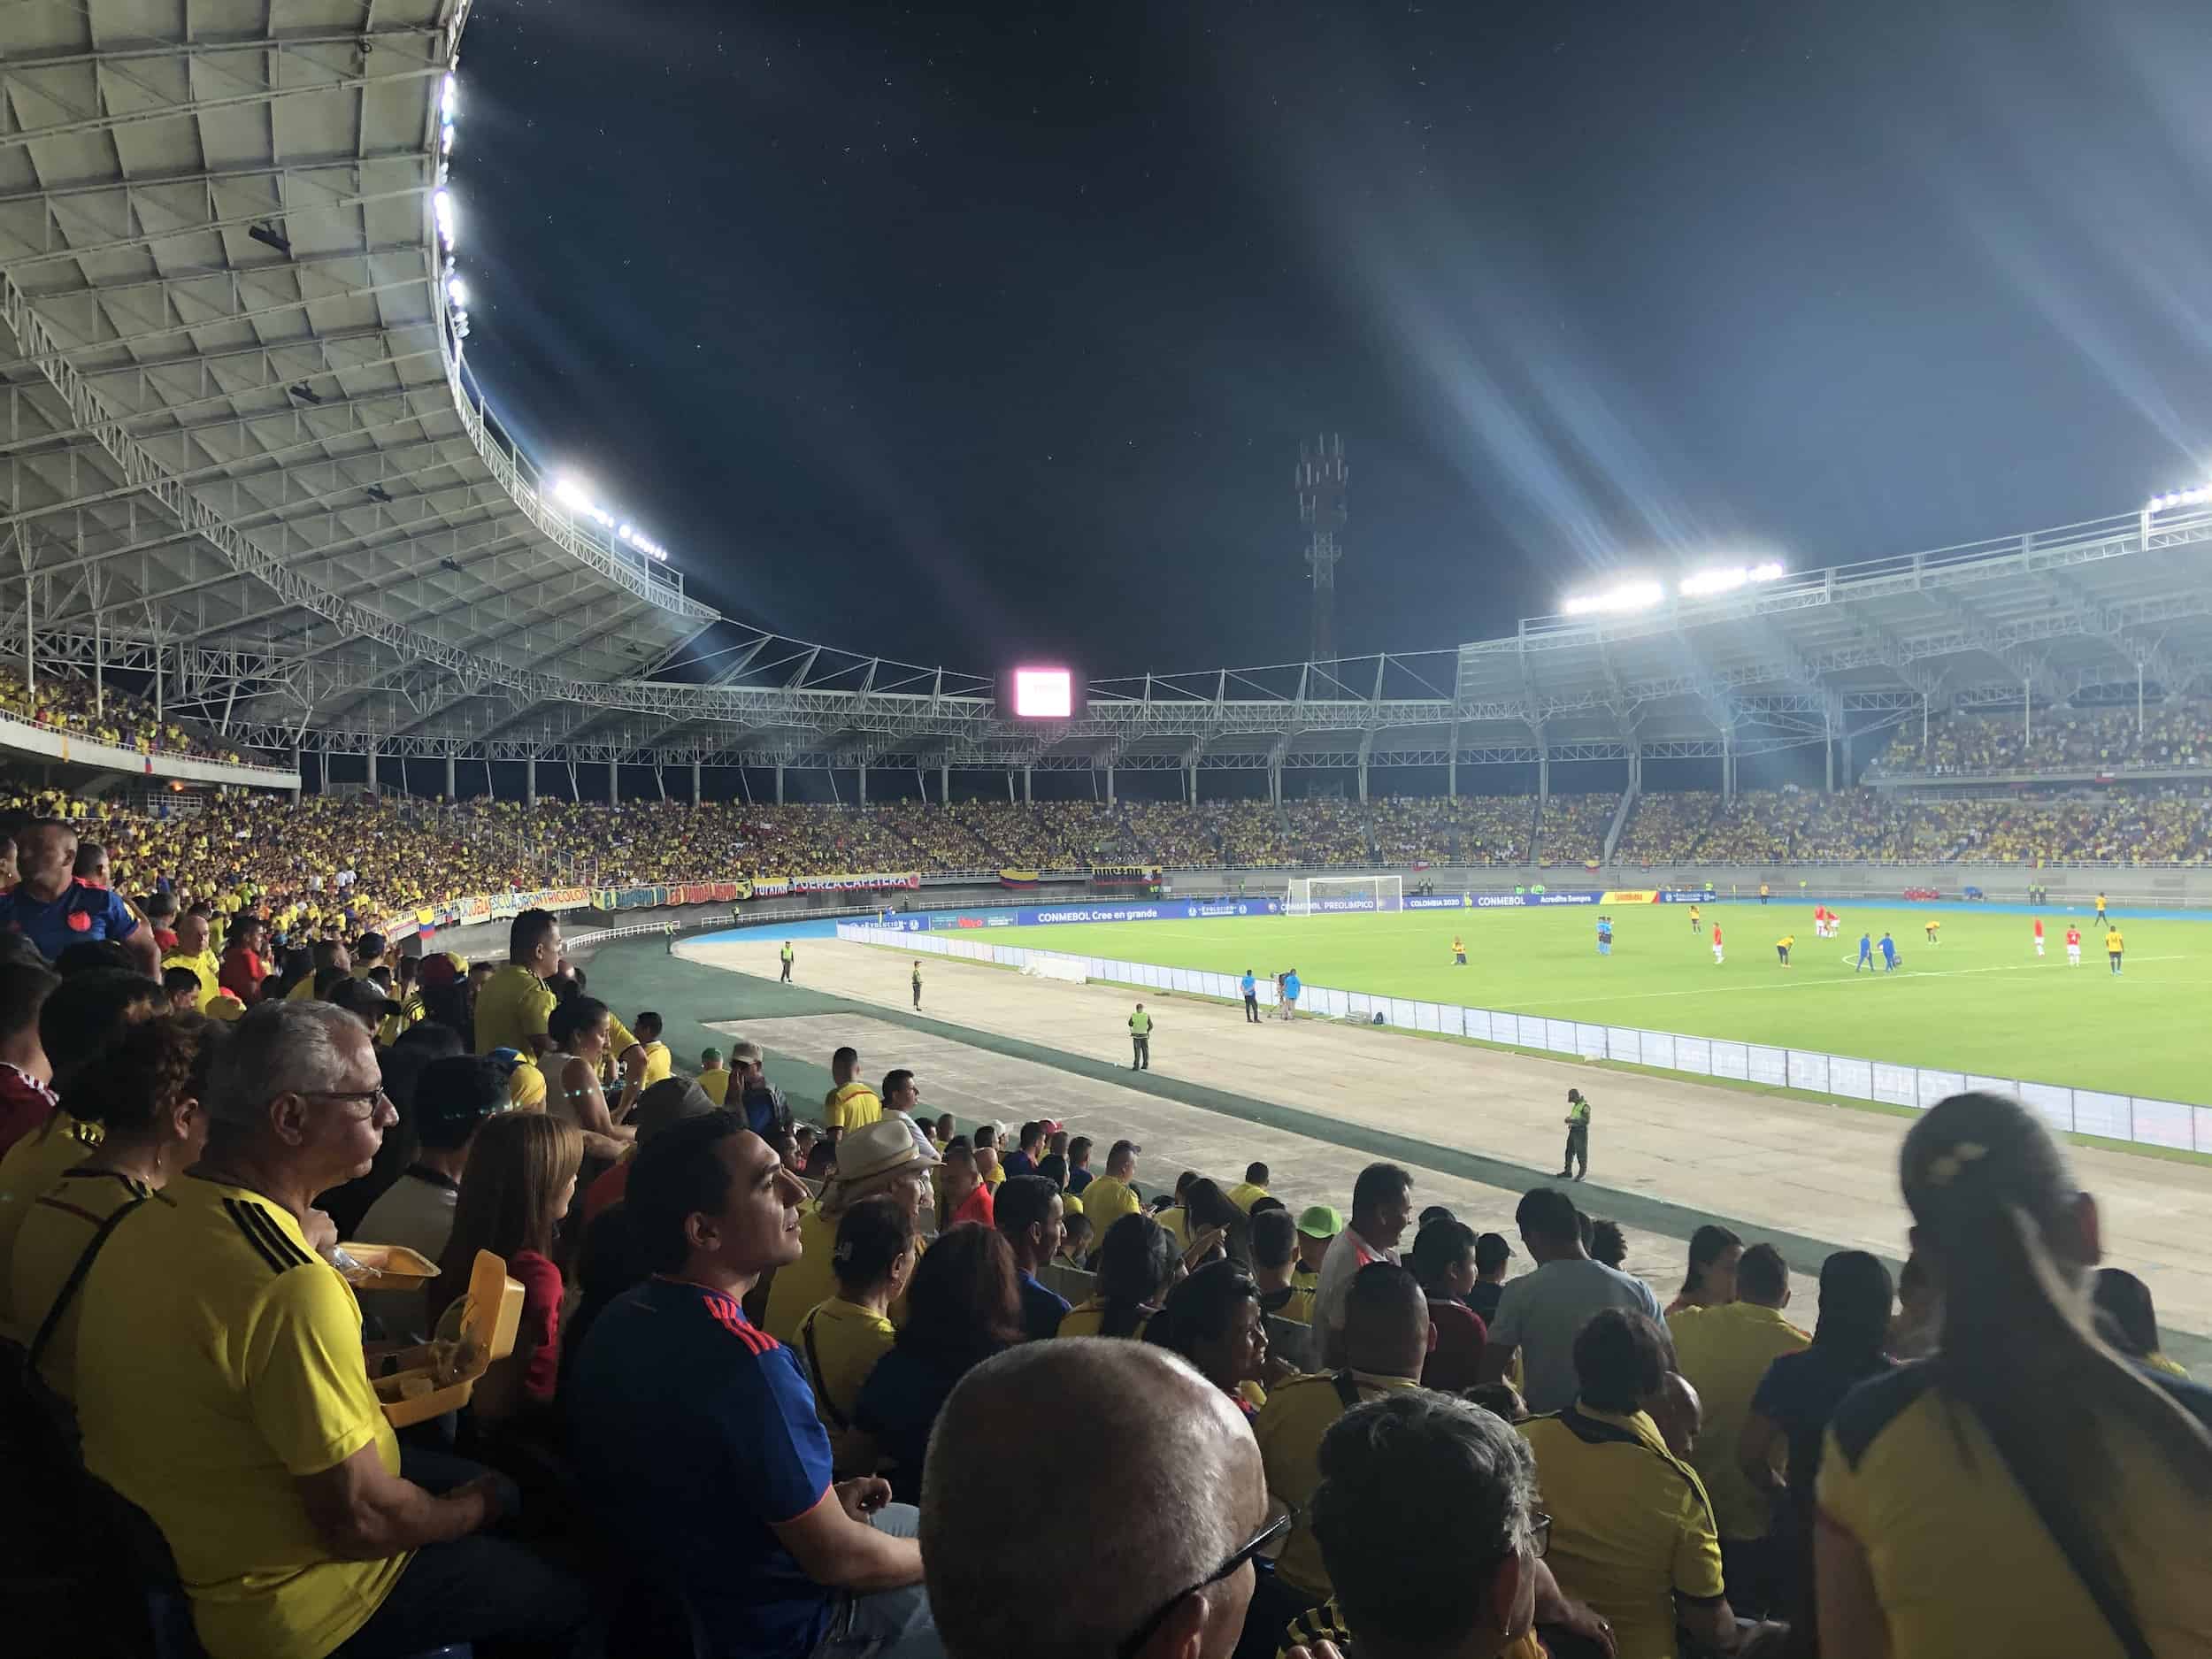 Yellow Colombian shirts filling the stands